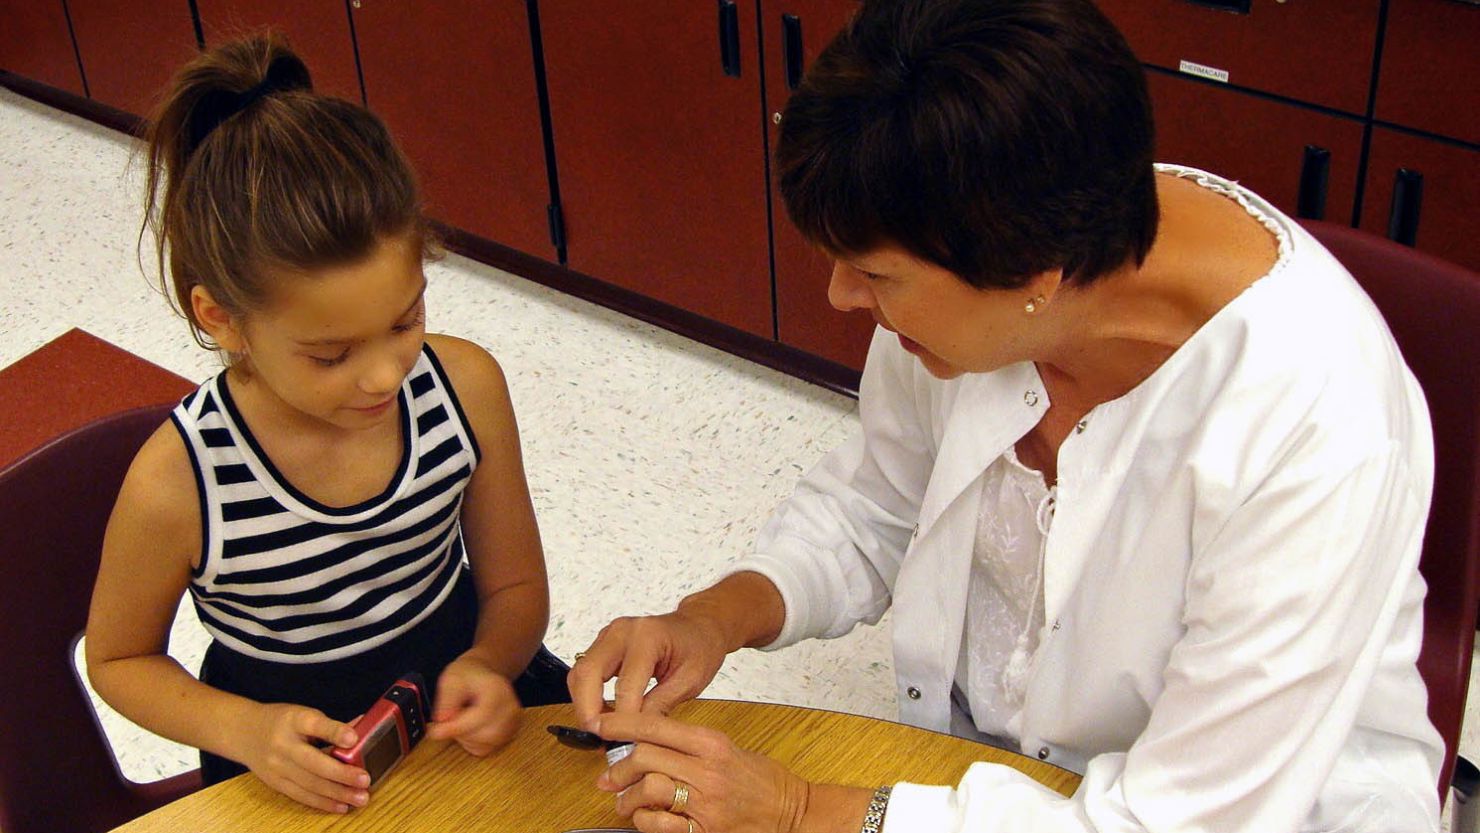 Adalyne Rose tests her blood glucose levels with the help of her school nurse, Carla Moore.